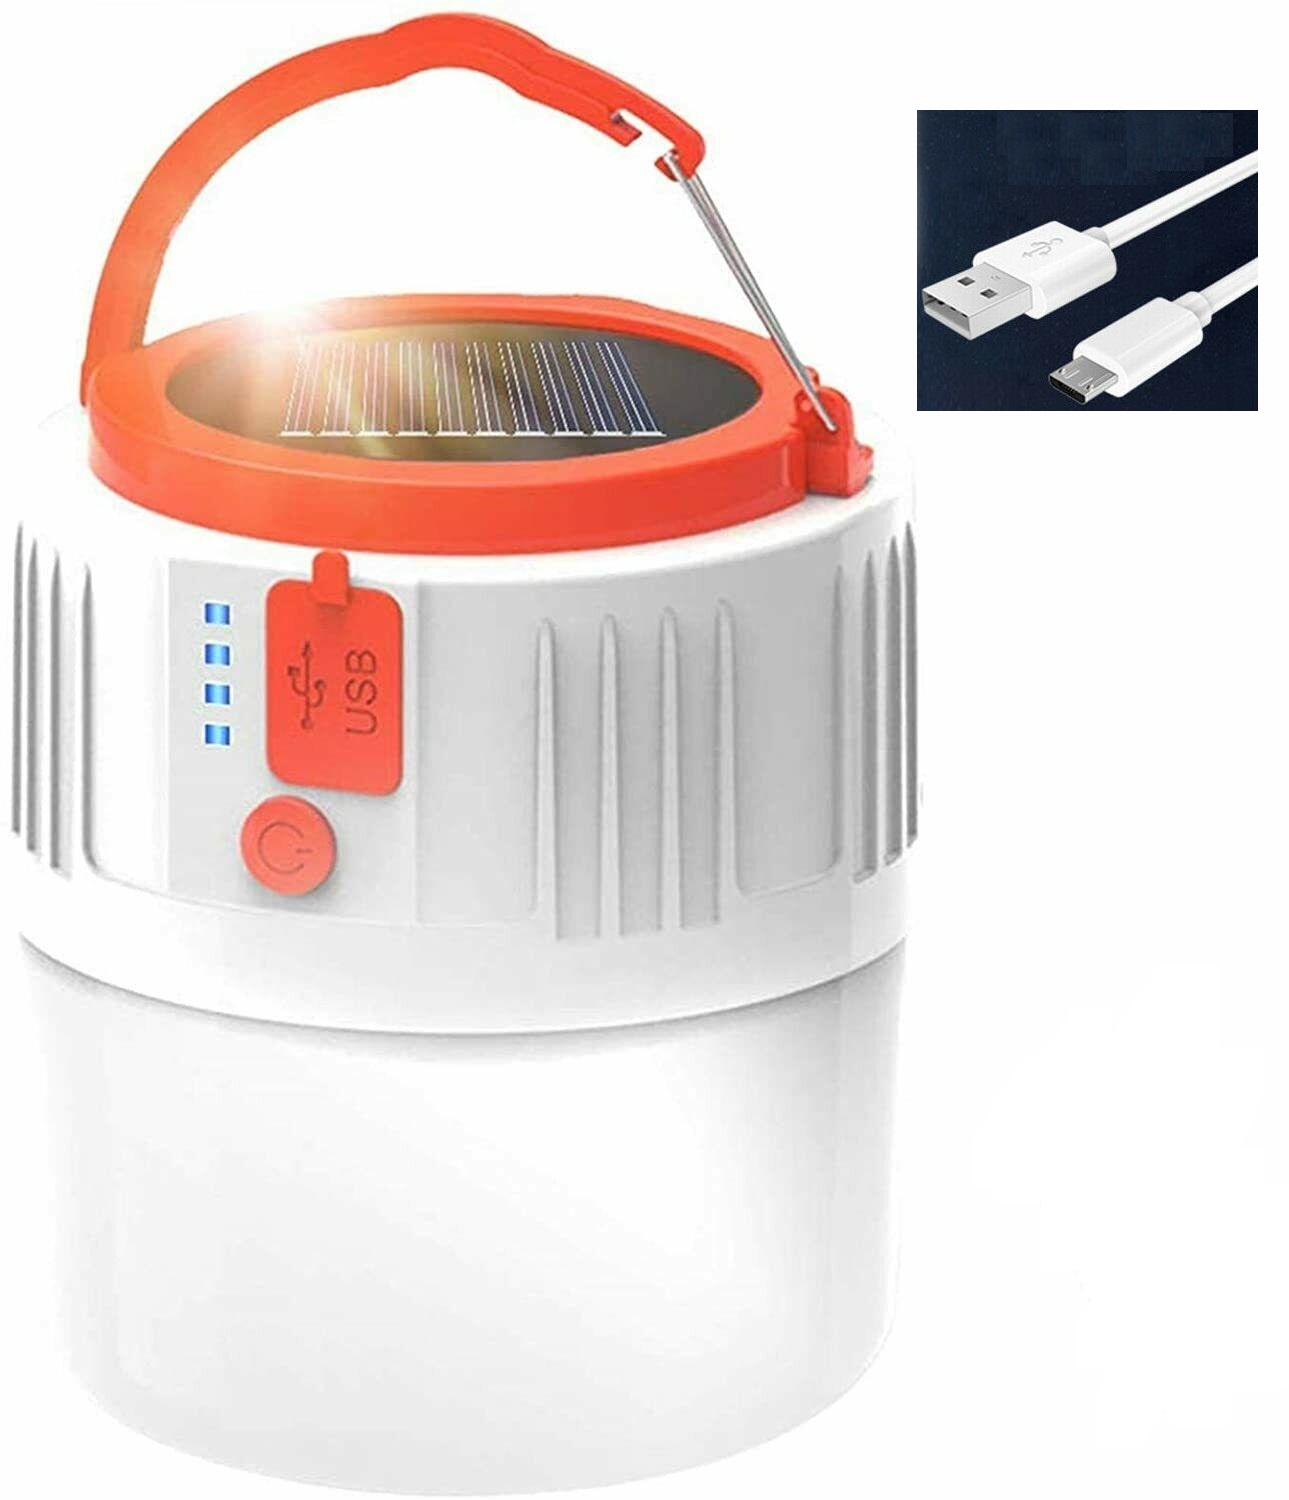 Portable Rechargeable Solar Led Camping  Light Lantern Hiking Tent Lamp Emergency Lamp USB type 80w